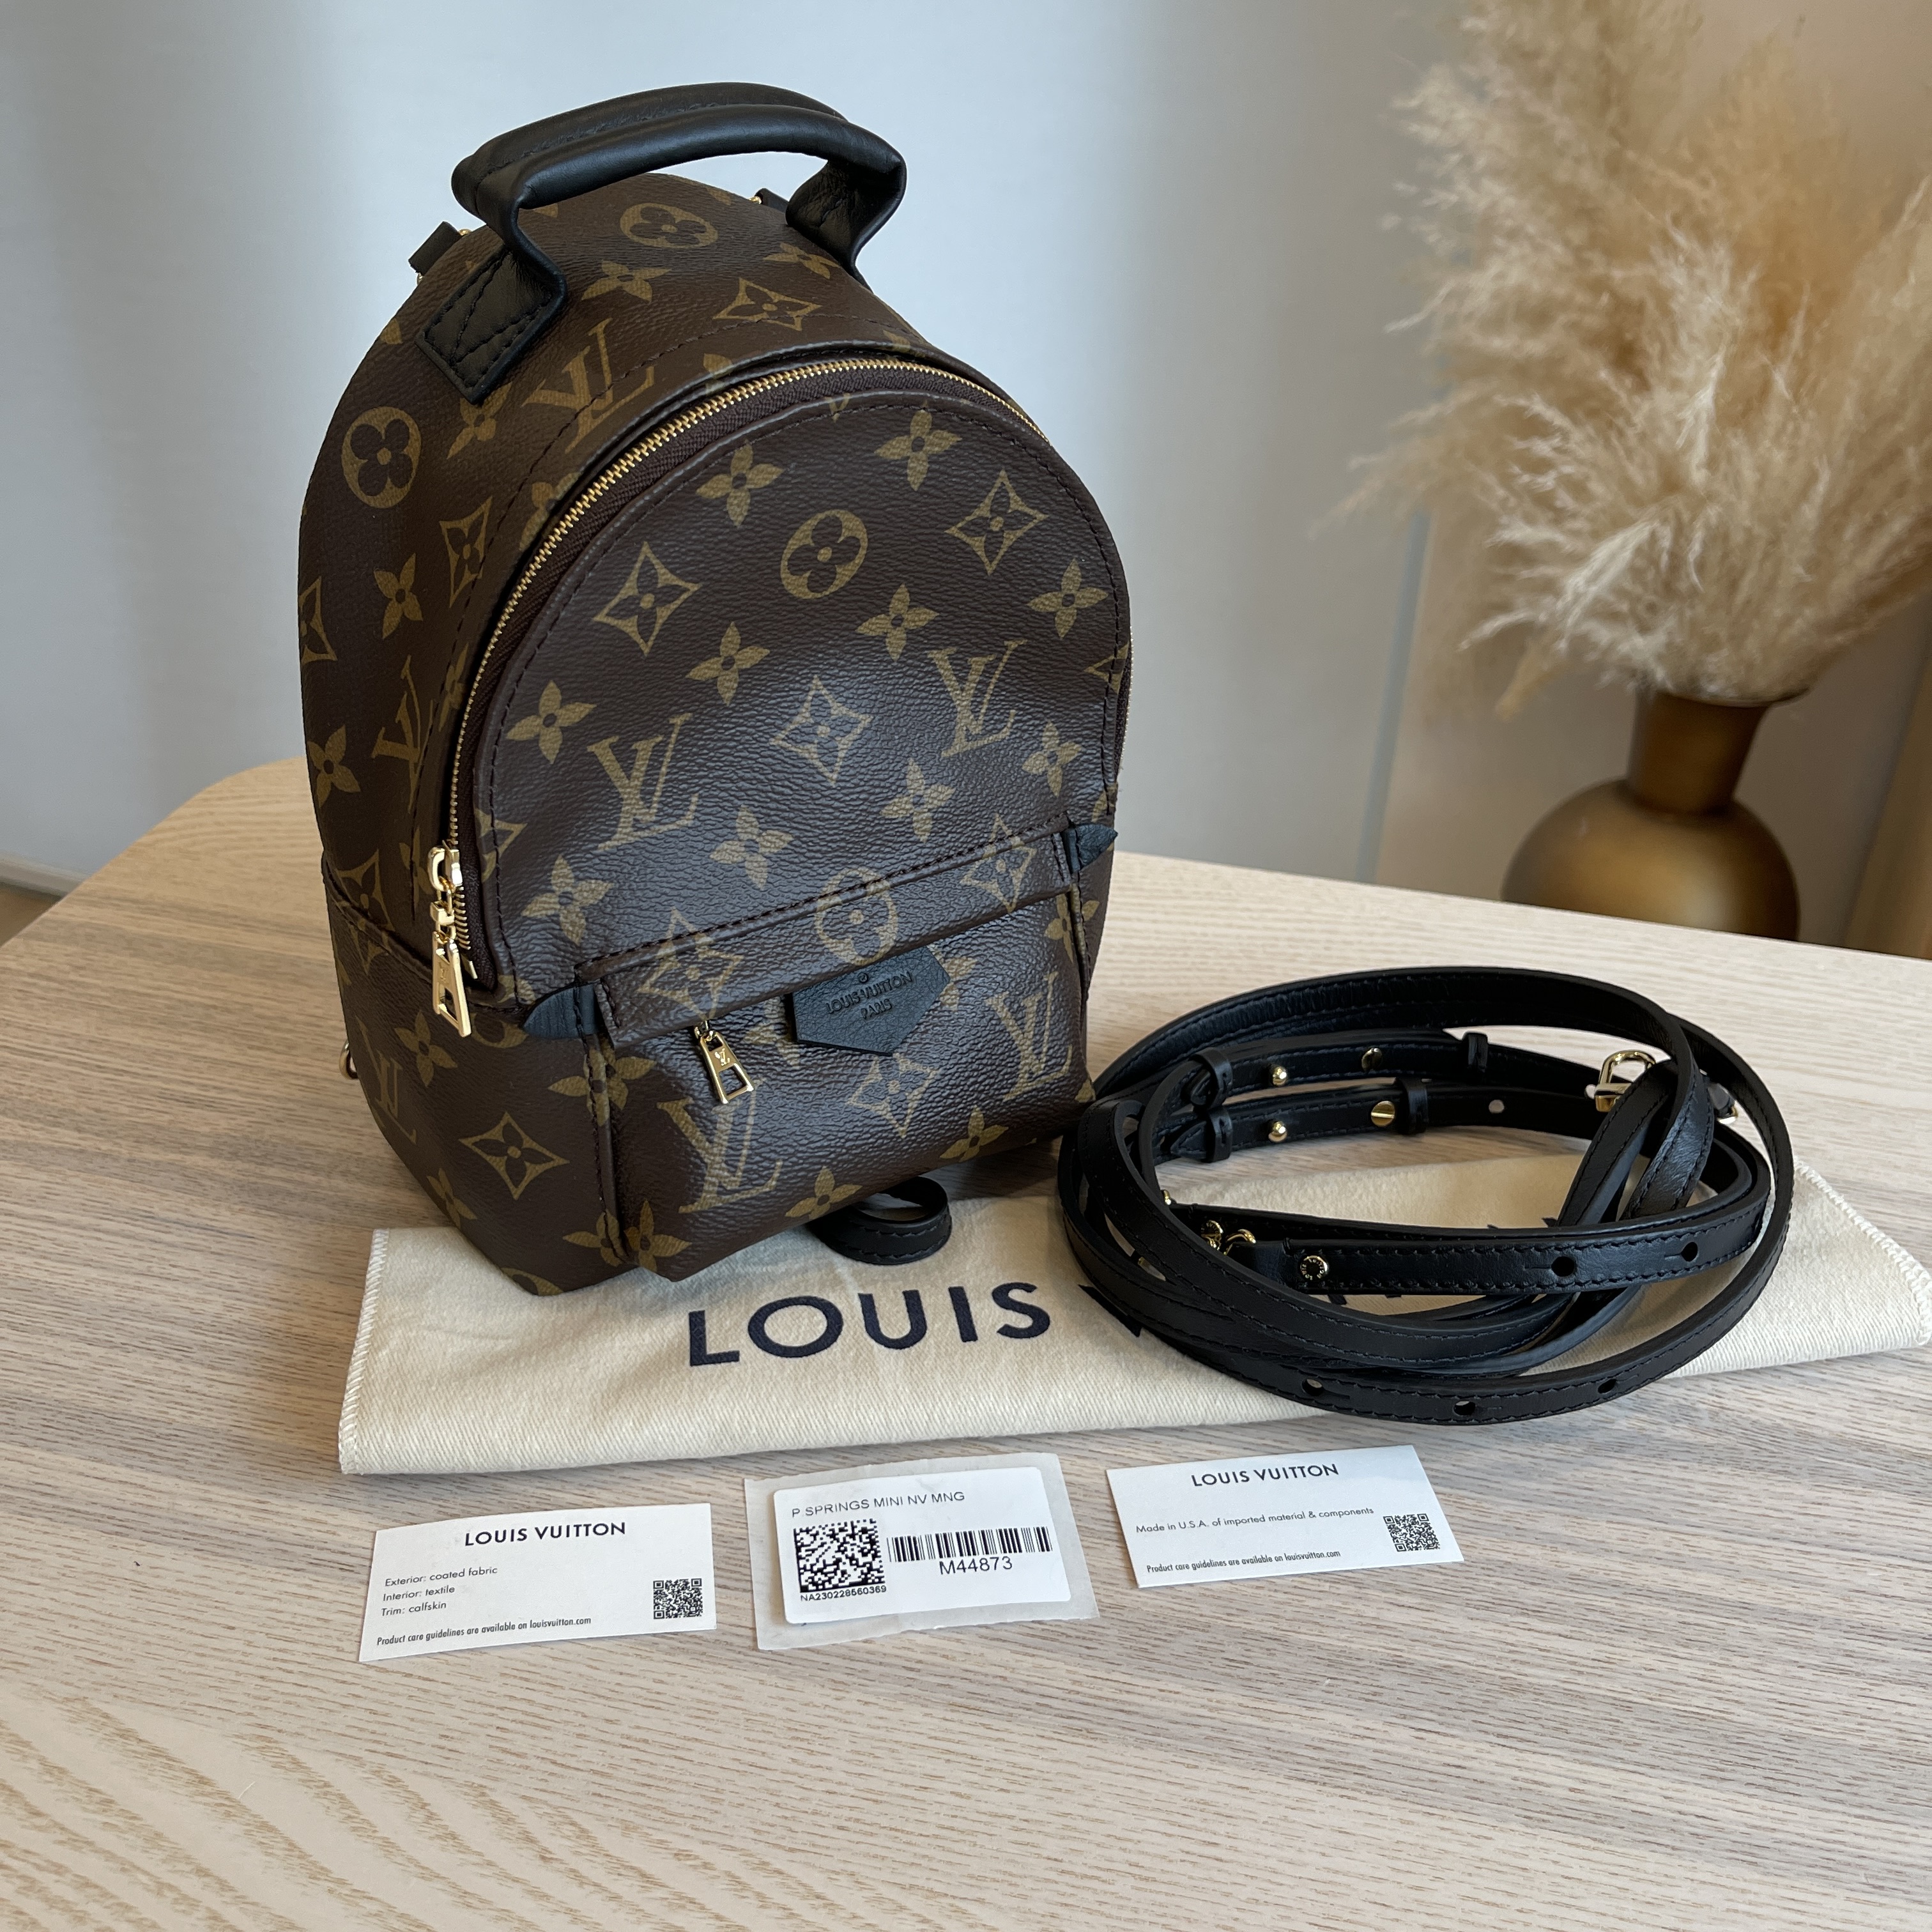 LOUIS VUITTON PALM SPRINGS MINI  Review & how I got my hands on